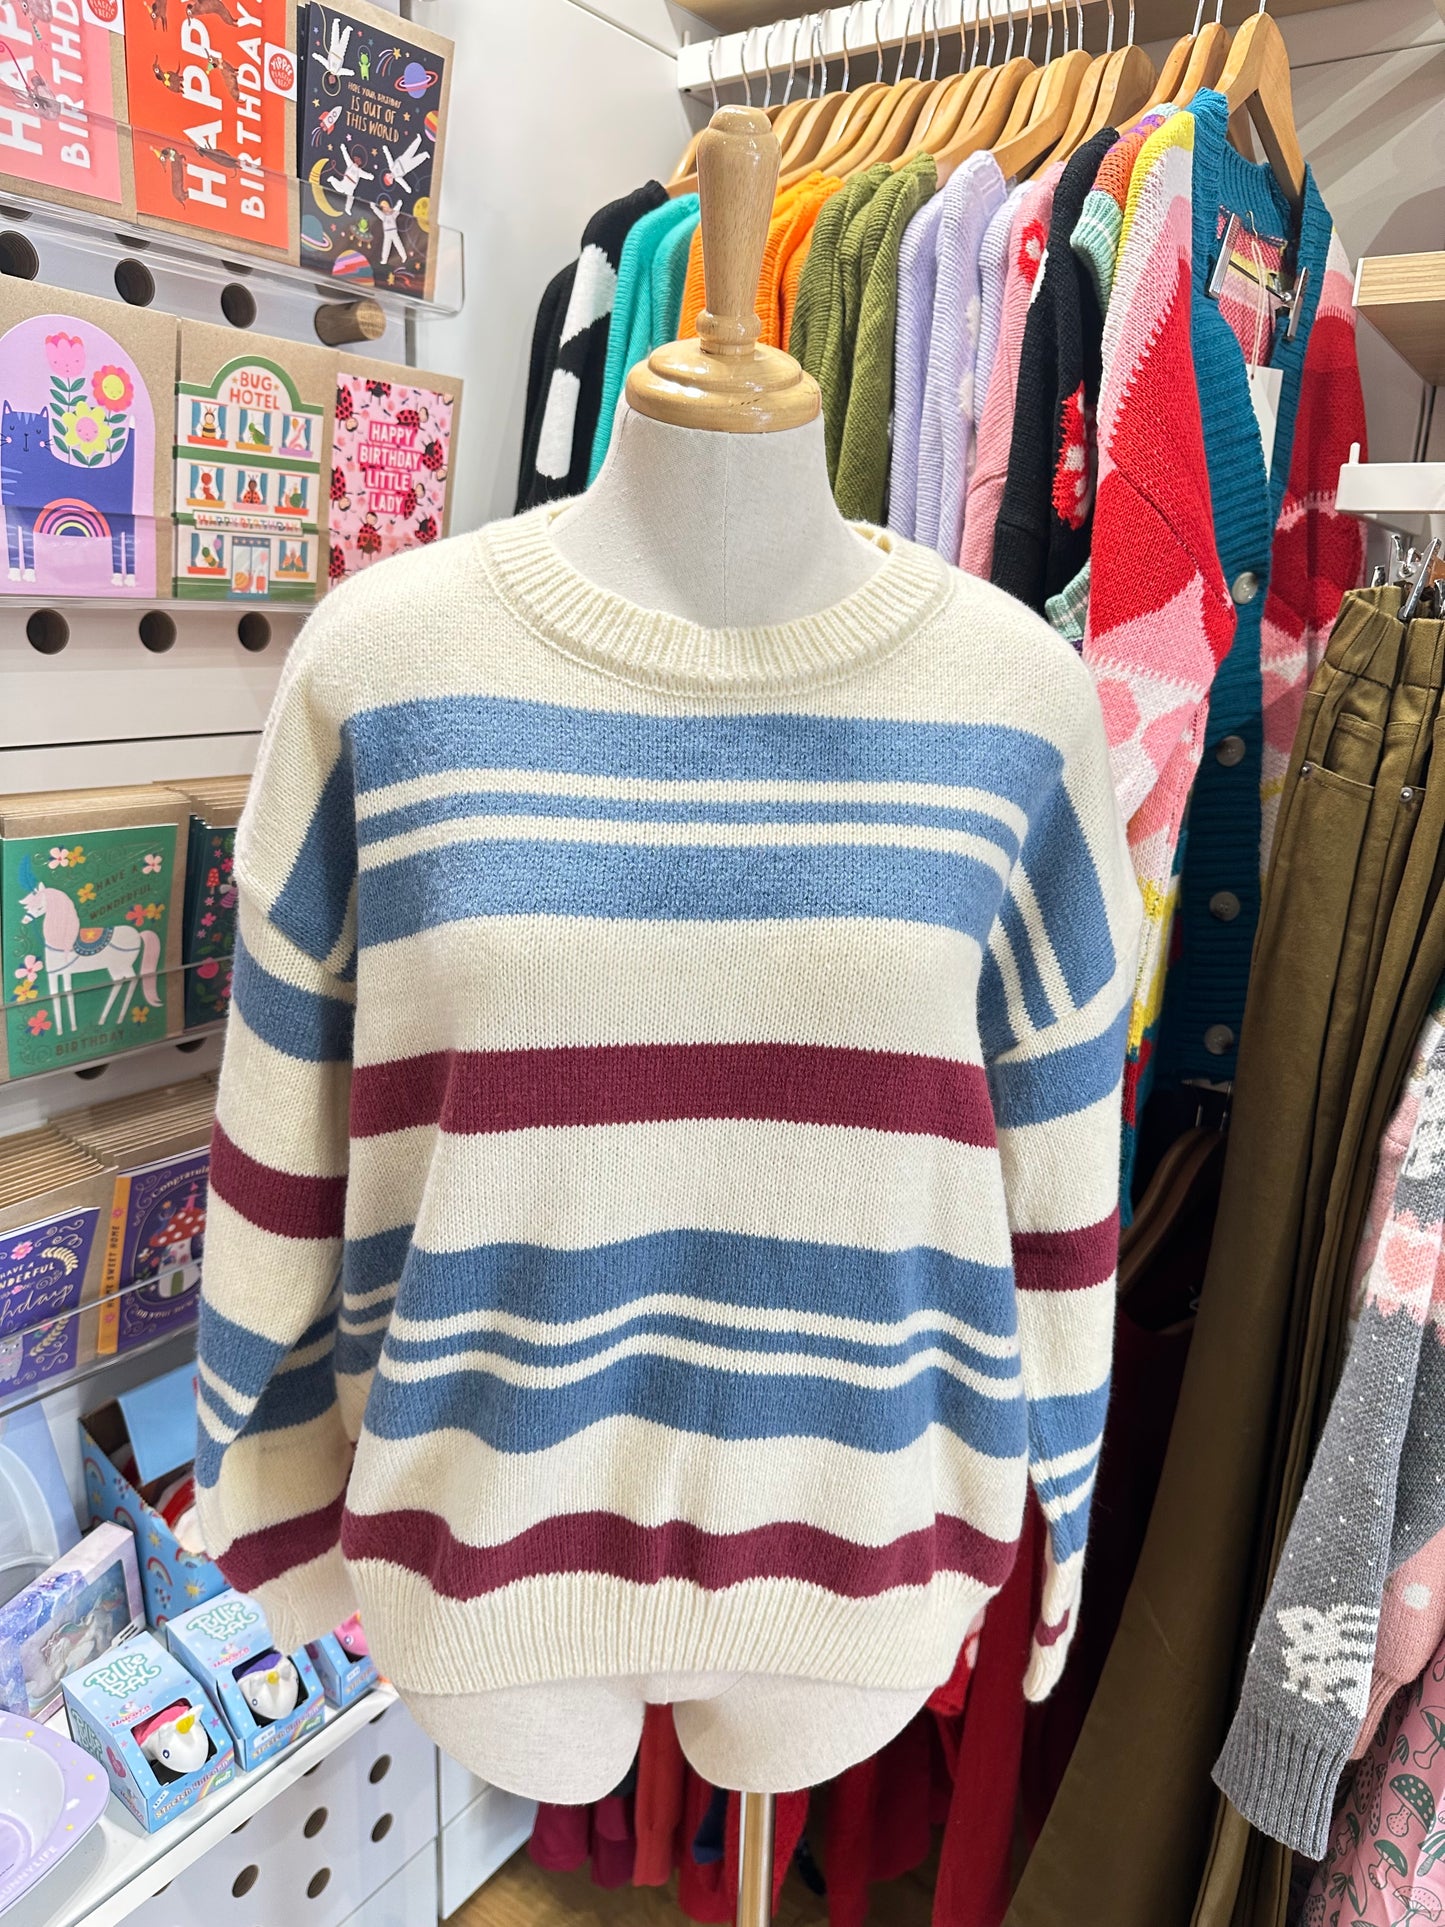 Another striped pullover